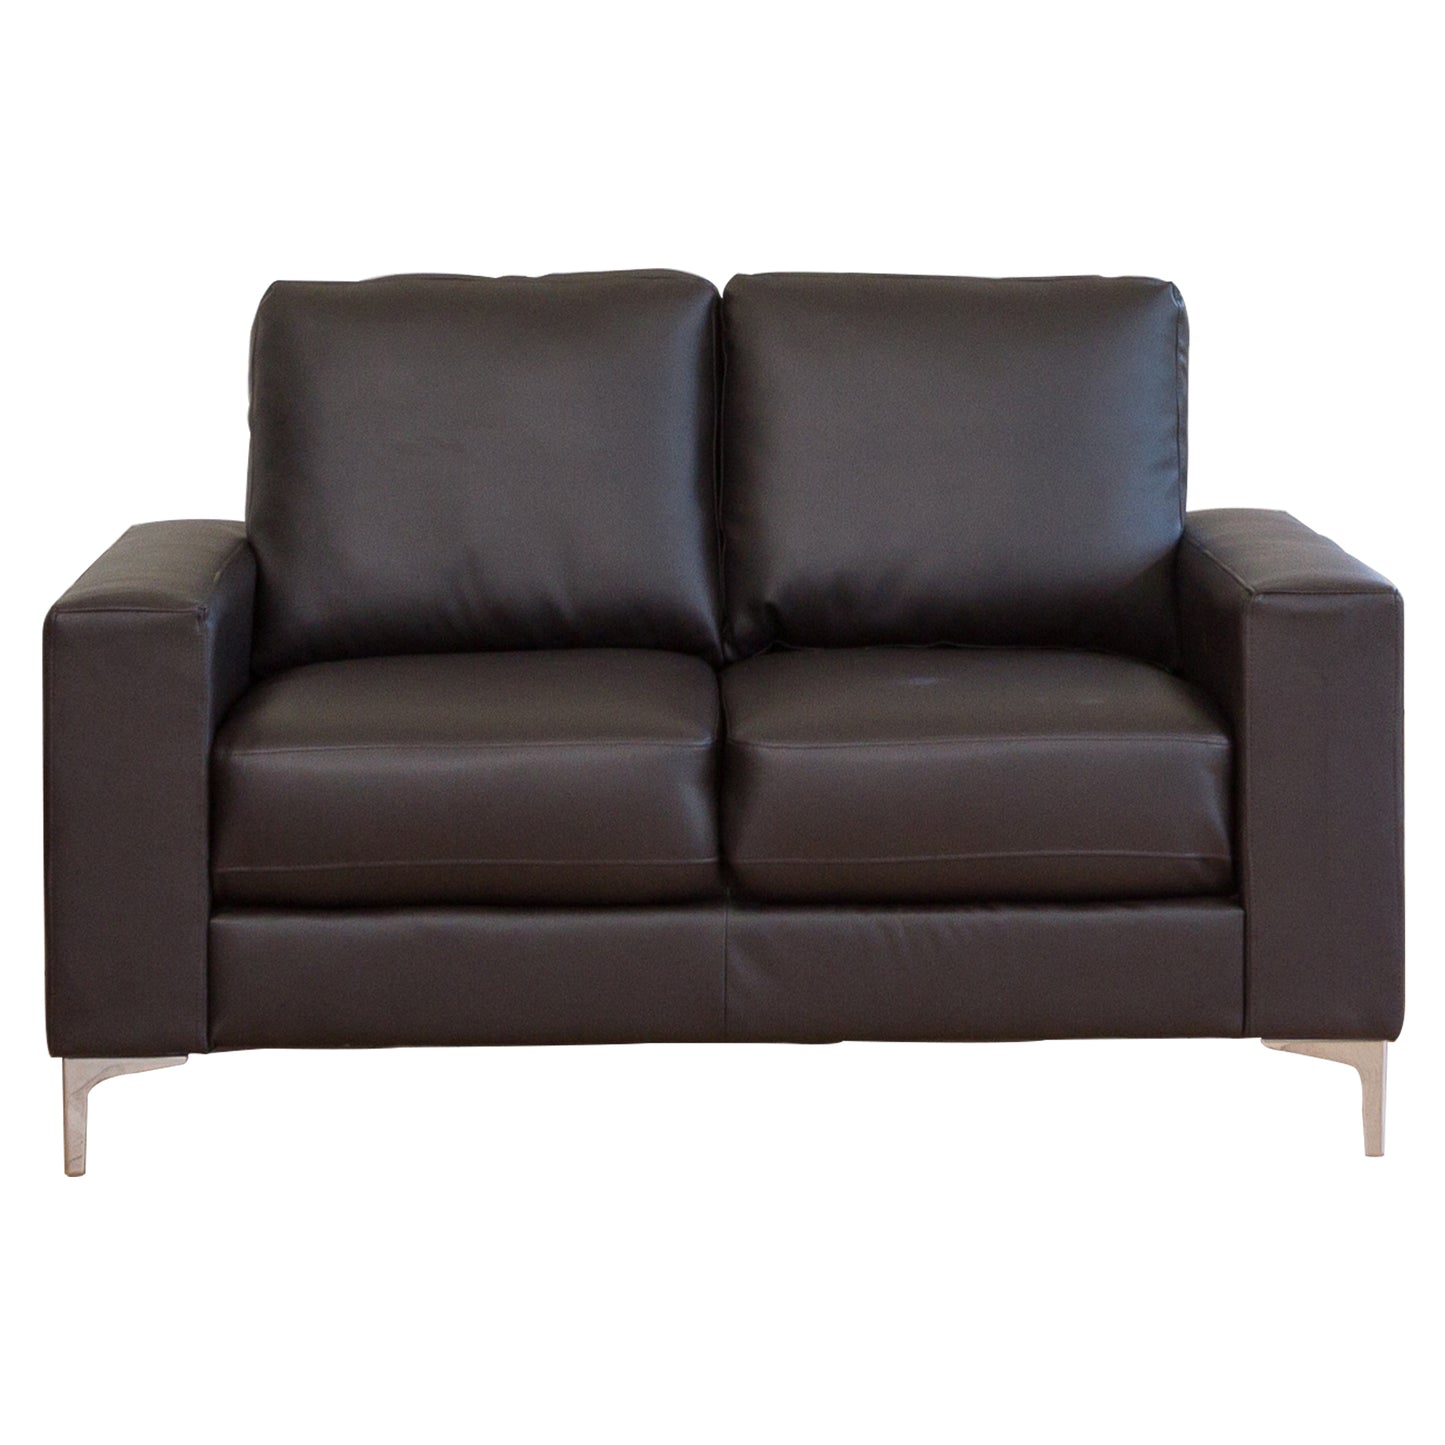 Small Commercial Grade Leather Sofa Available in black &  brown * - CasaFenix